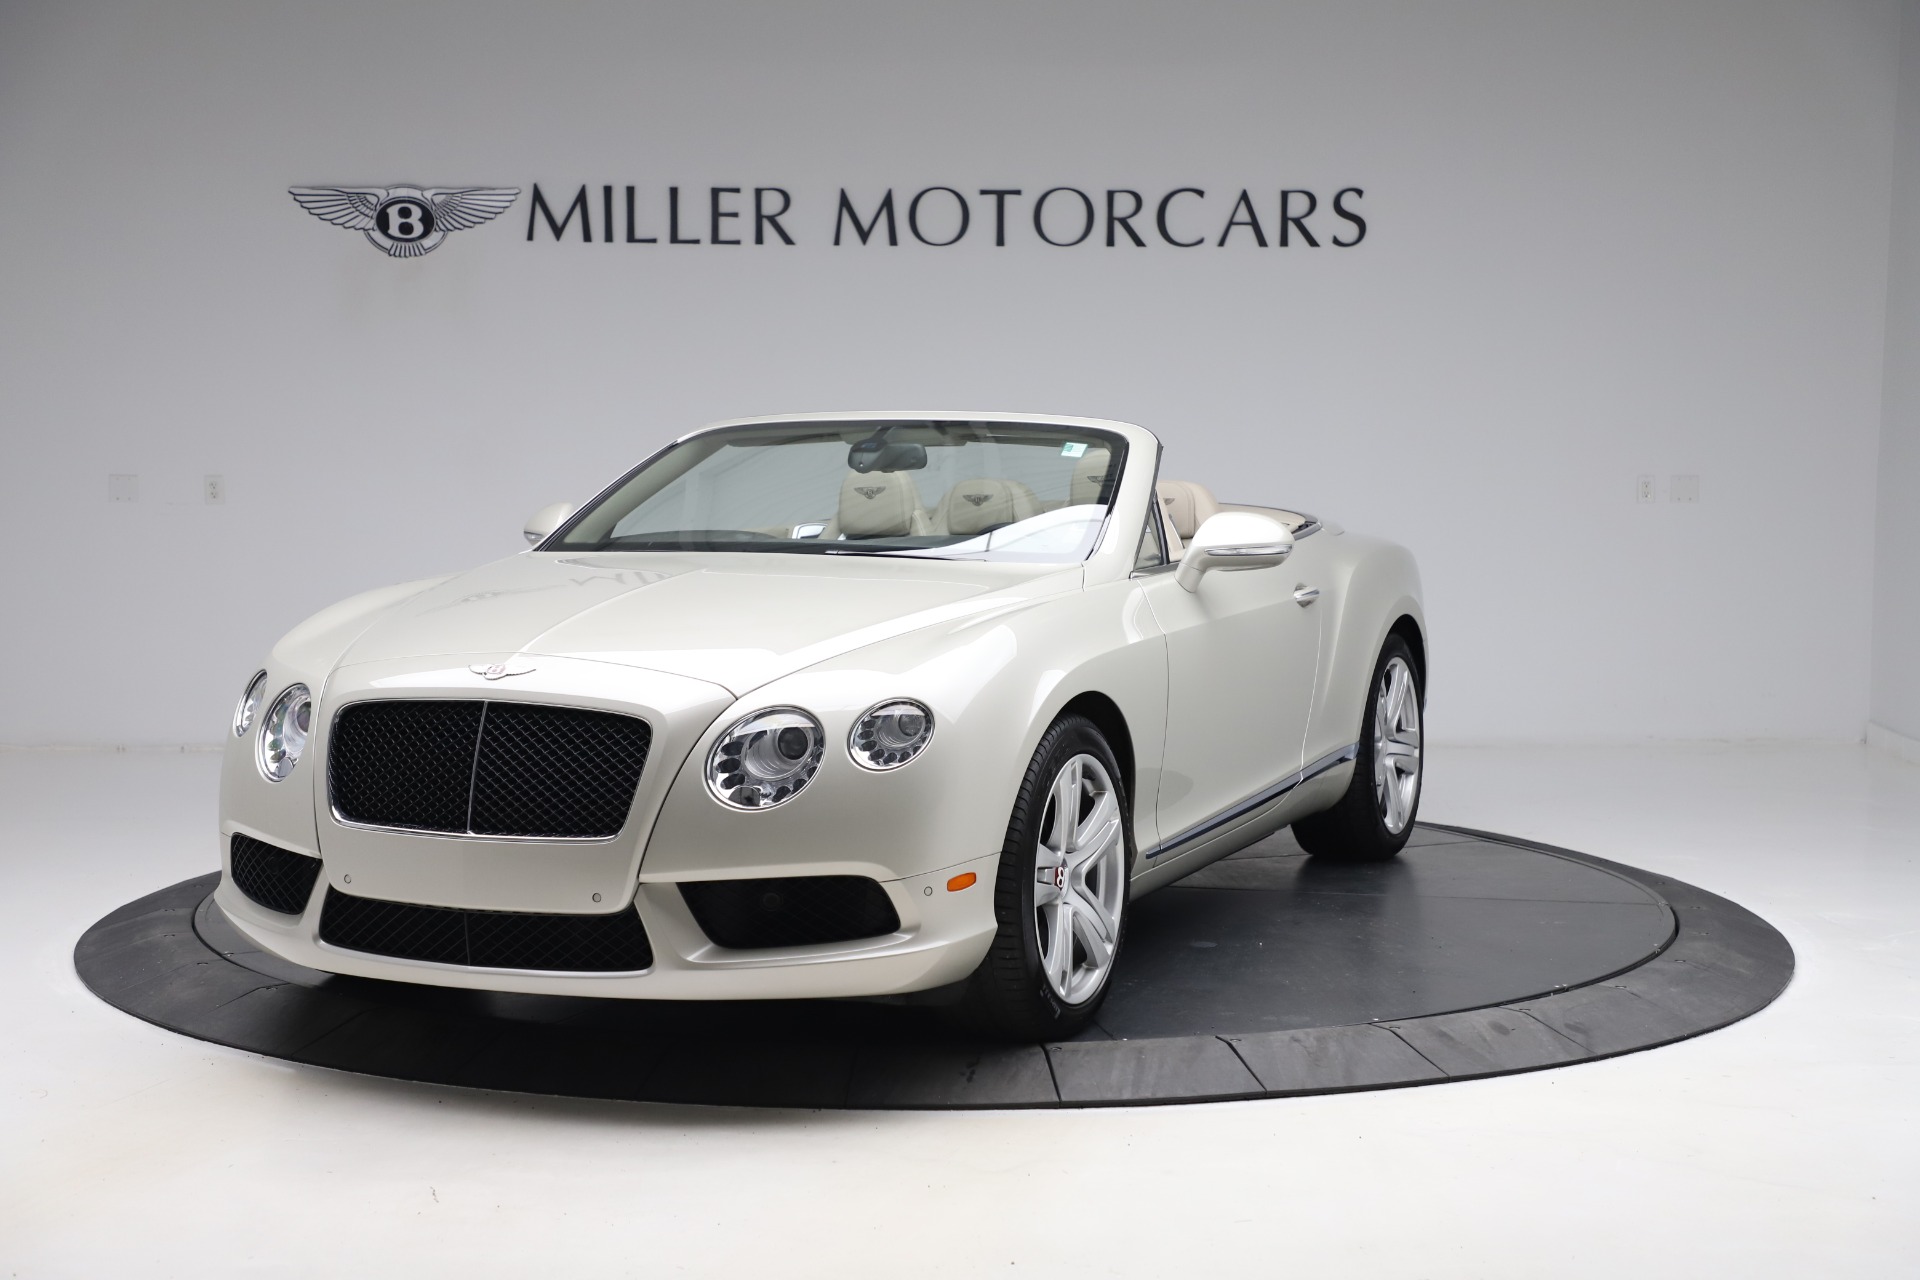 Used 2015 Bentley Continental GTC V8 for sale Sold at Pagani of Greenwich in Greenwich CT 06830 1